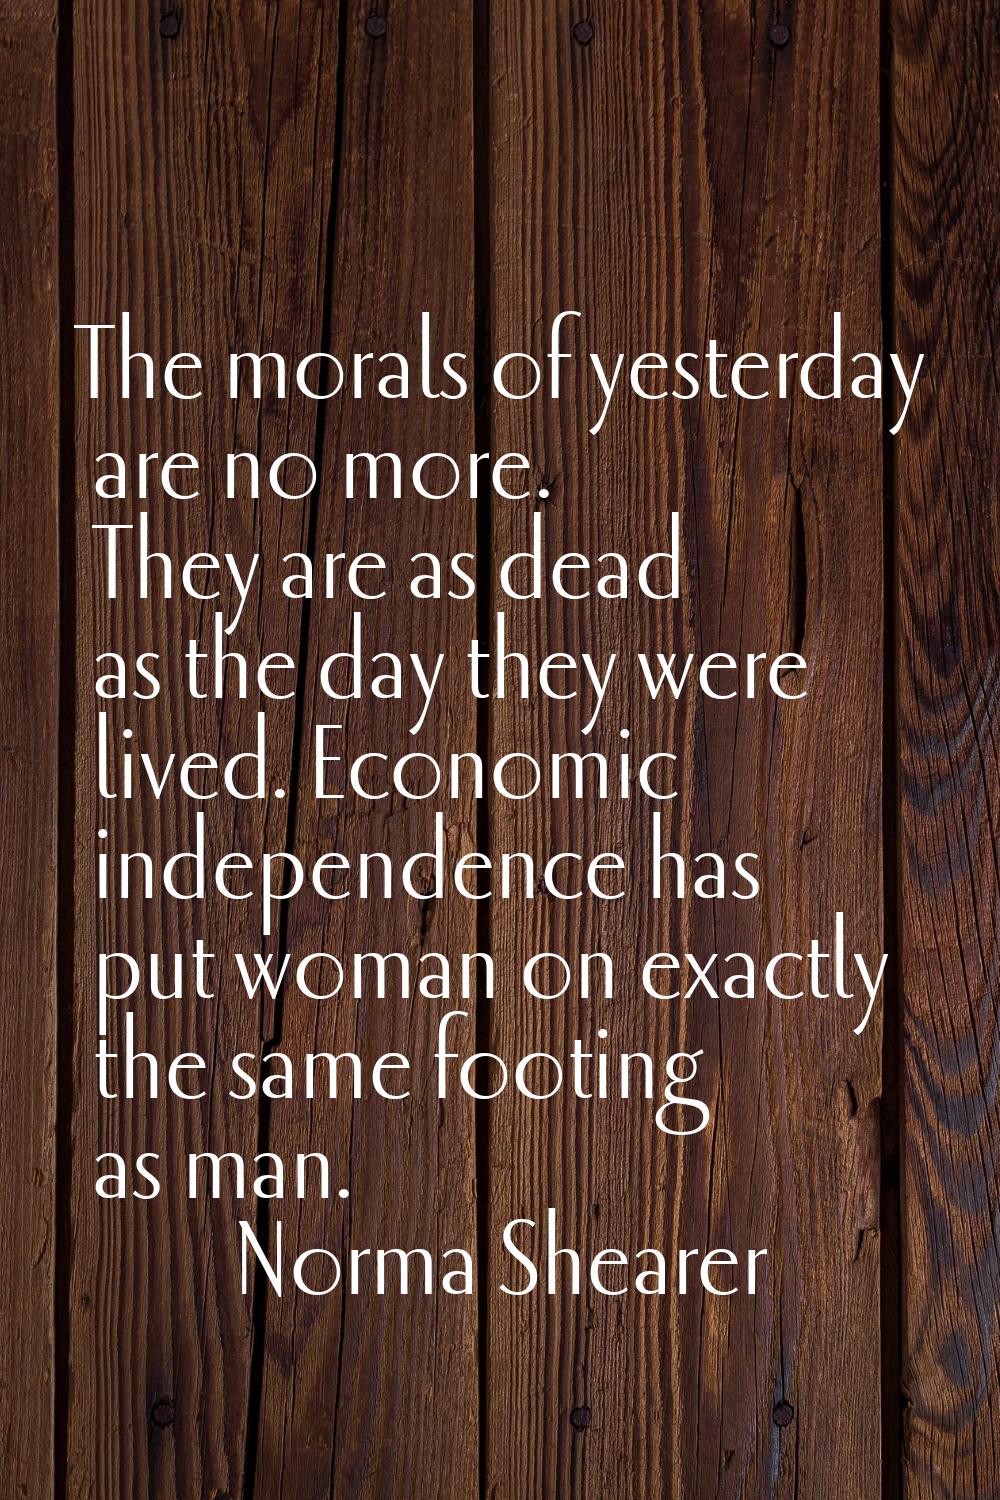 The morals of yesterday are no more. They are as dead as the day they were lived. Economic independ